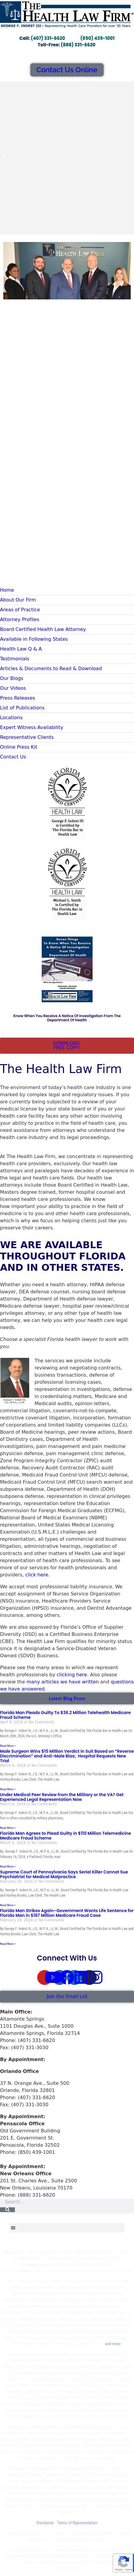 The Health Law Firm - Altamonte Springs FL Lawyers